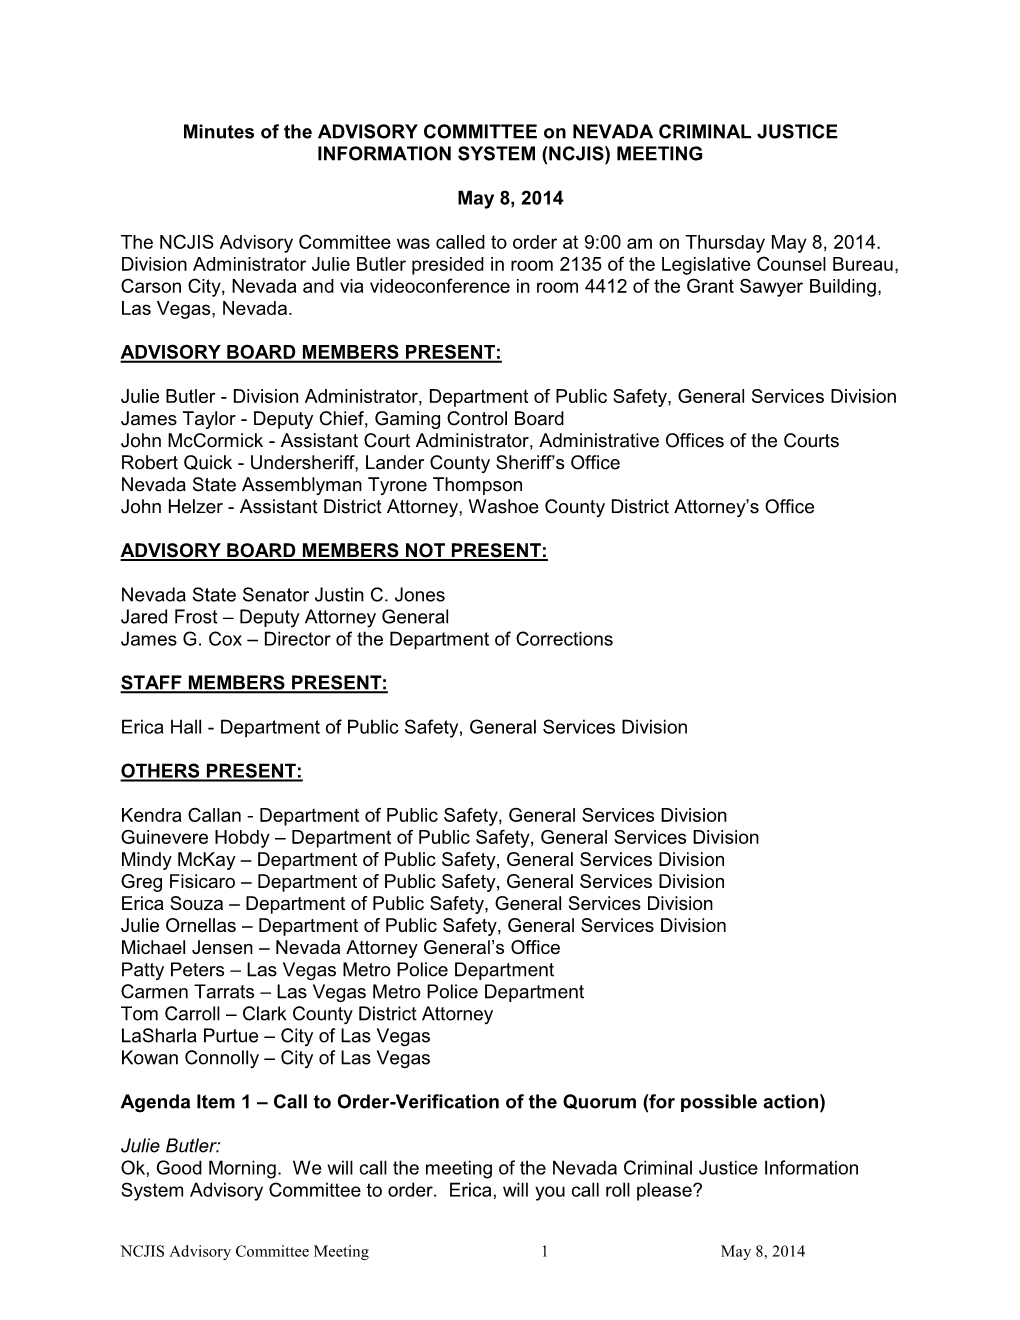 Minutes of the ADVISORY COMMITTEE on NEVADA CRIMINAL JUSTICE INFORMATION SYSTEM (NCJIS) MEETING